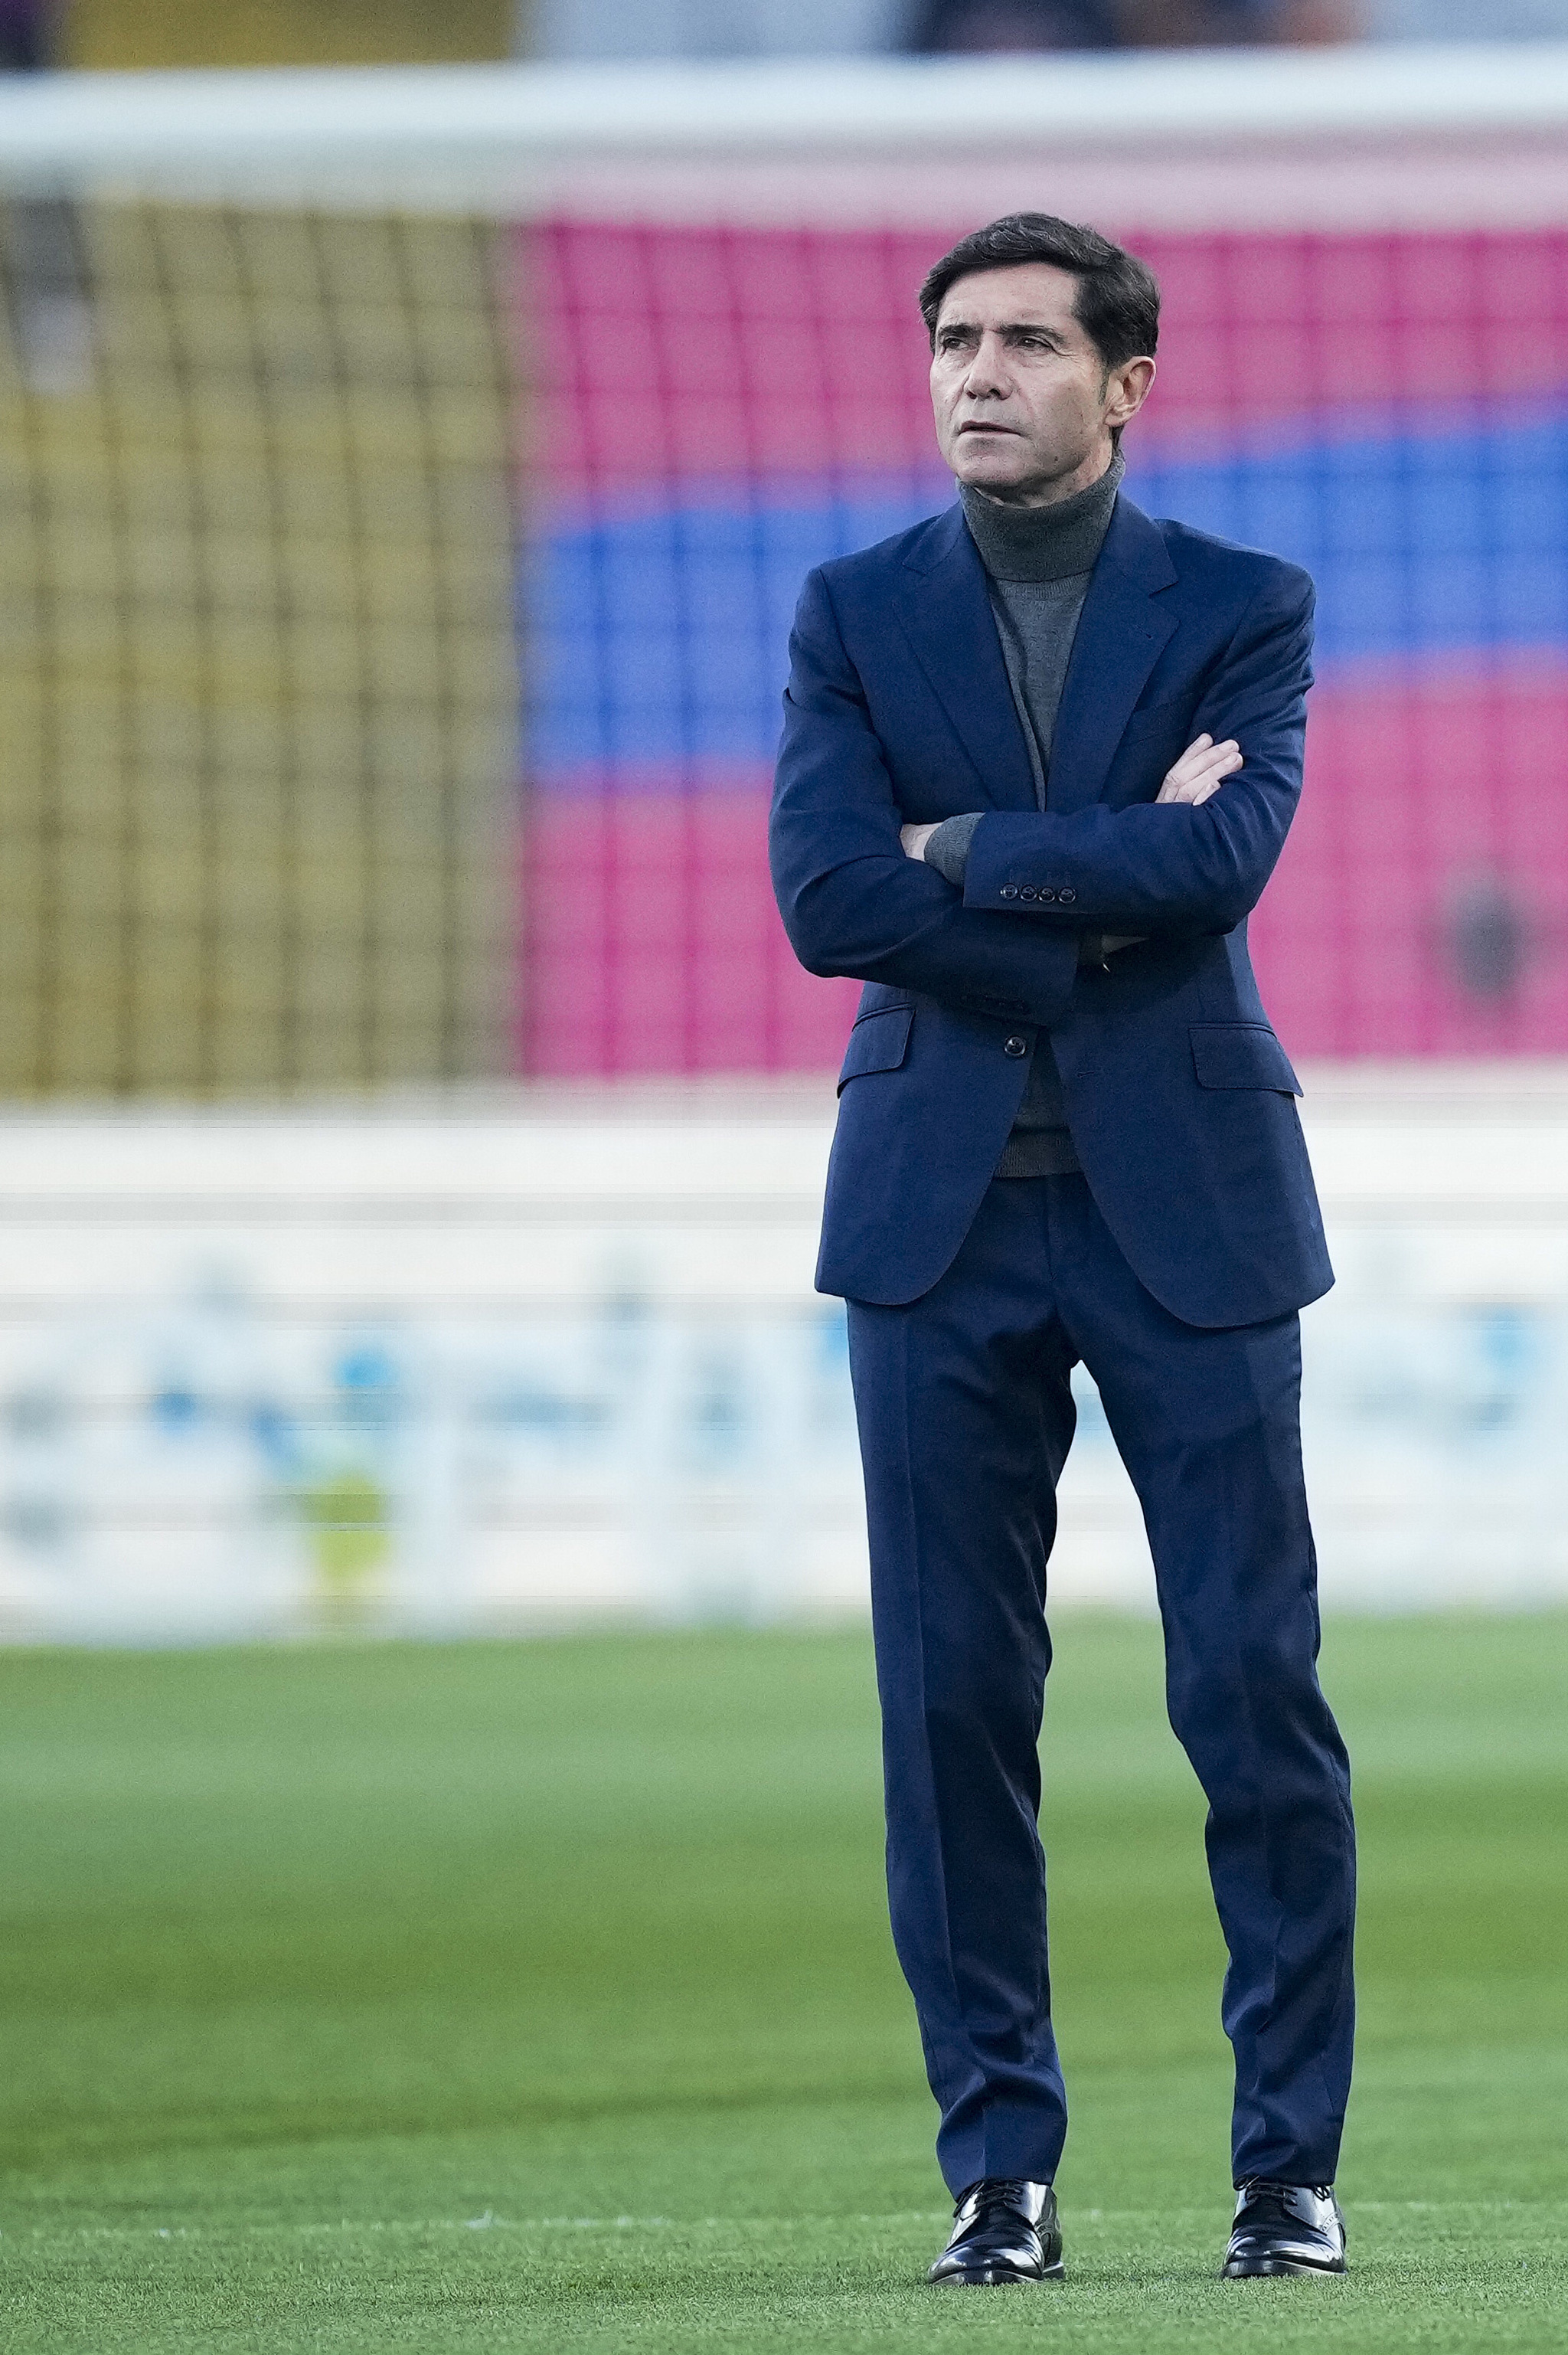 Villarreal coach Marcelino steps onto the pitch ahead of tonight's match